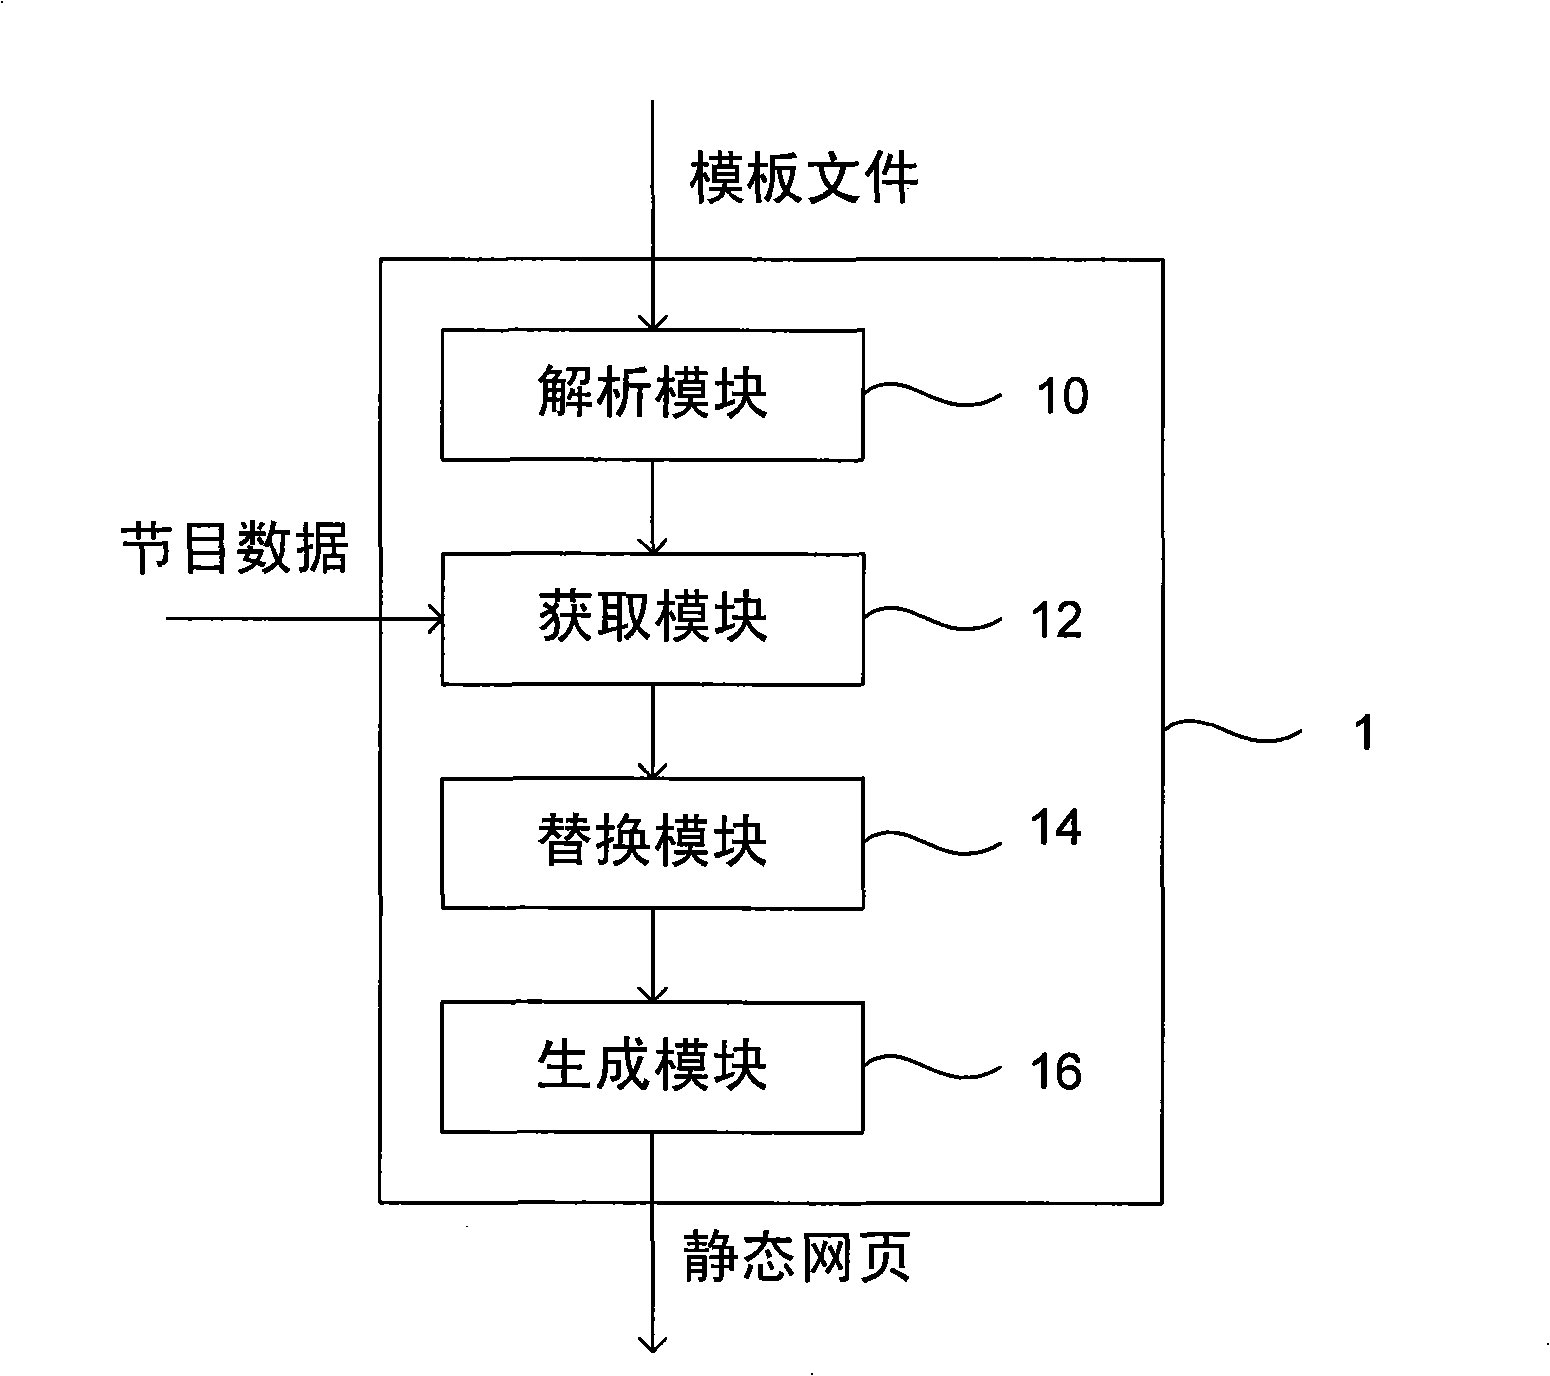 Method and apparatus for generating web page